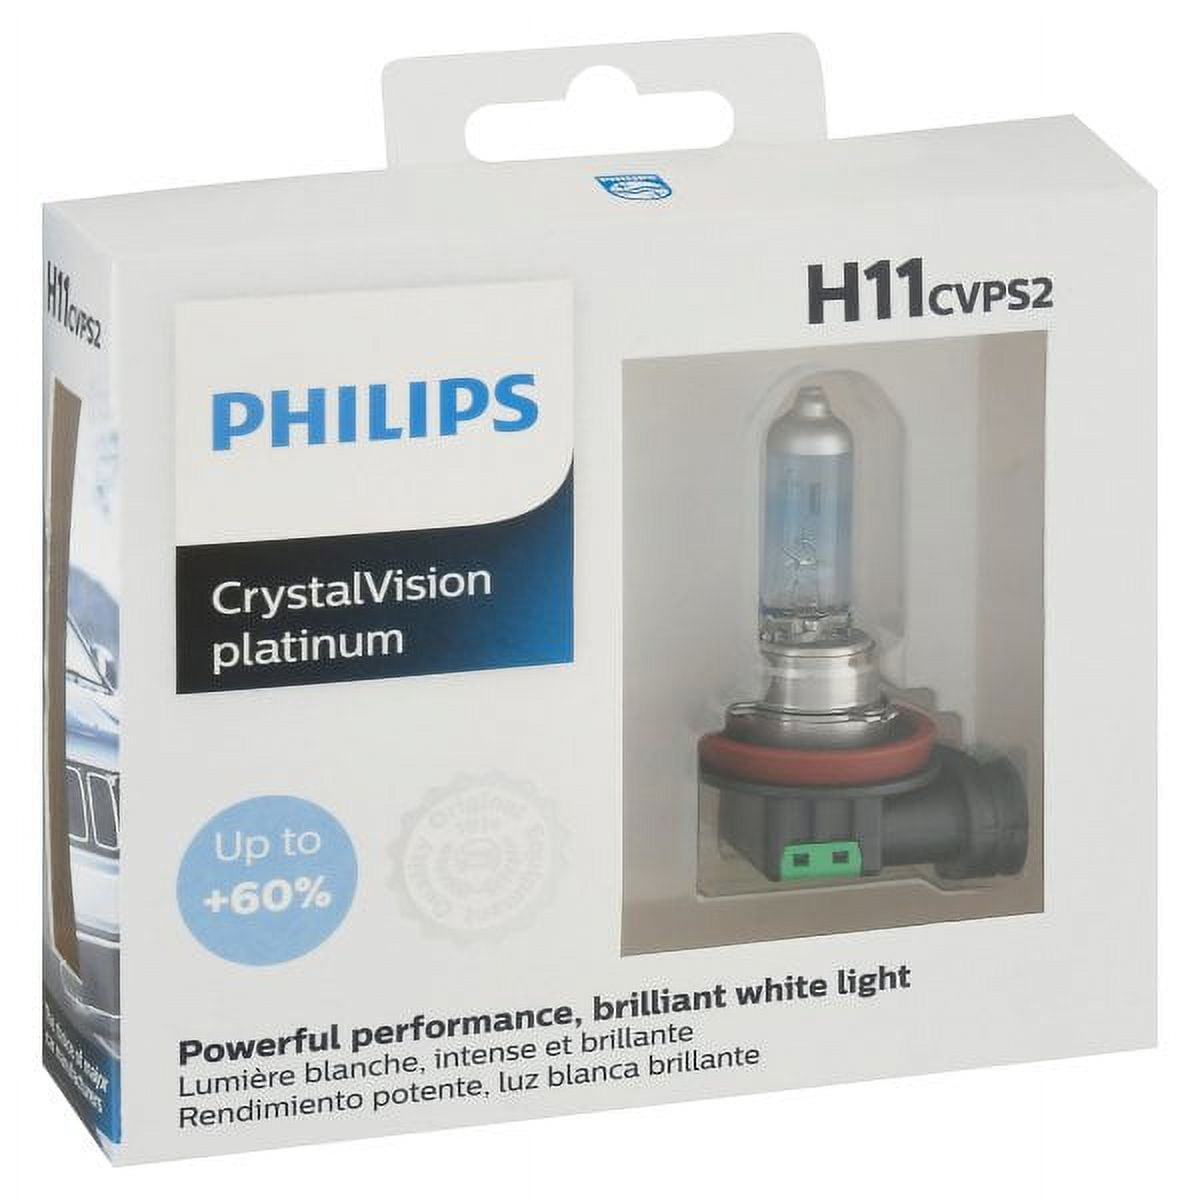 Philips Lamps, CrystalVision Platinum - 2 lamps